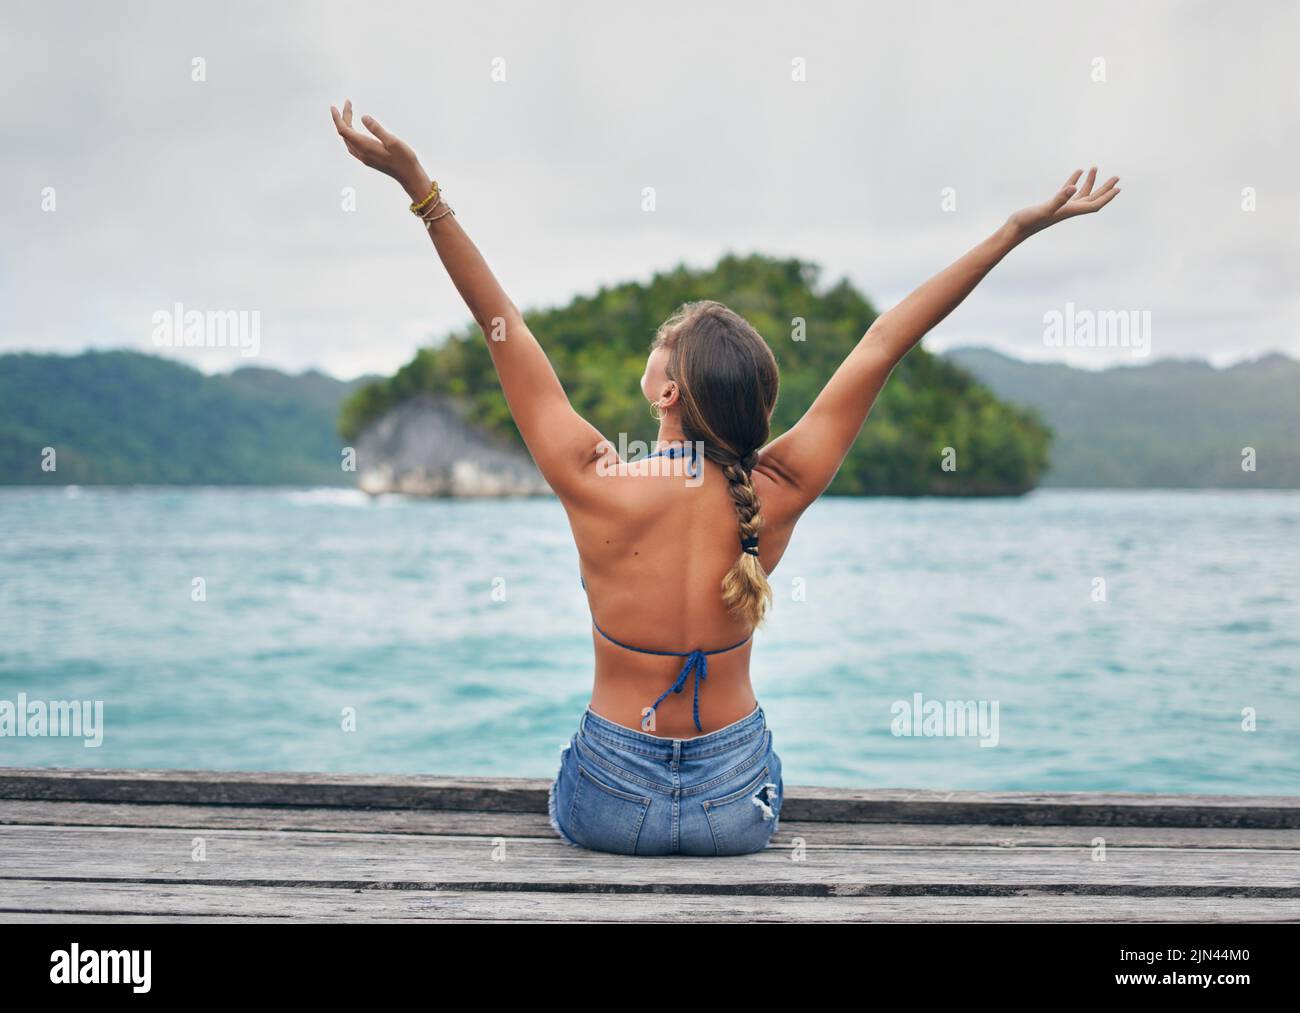 In the end, we only regret vacations not taken. Rearview shot of an unrecognizable woman sitting with her arms raised on a boardwalk overlooking the Stock Photo